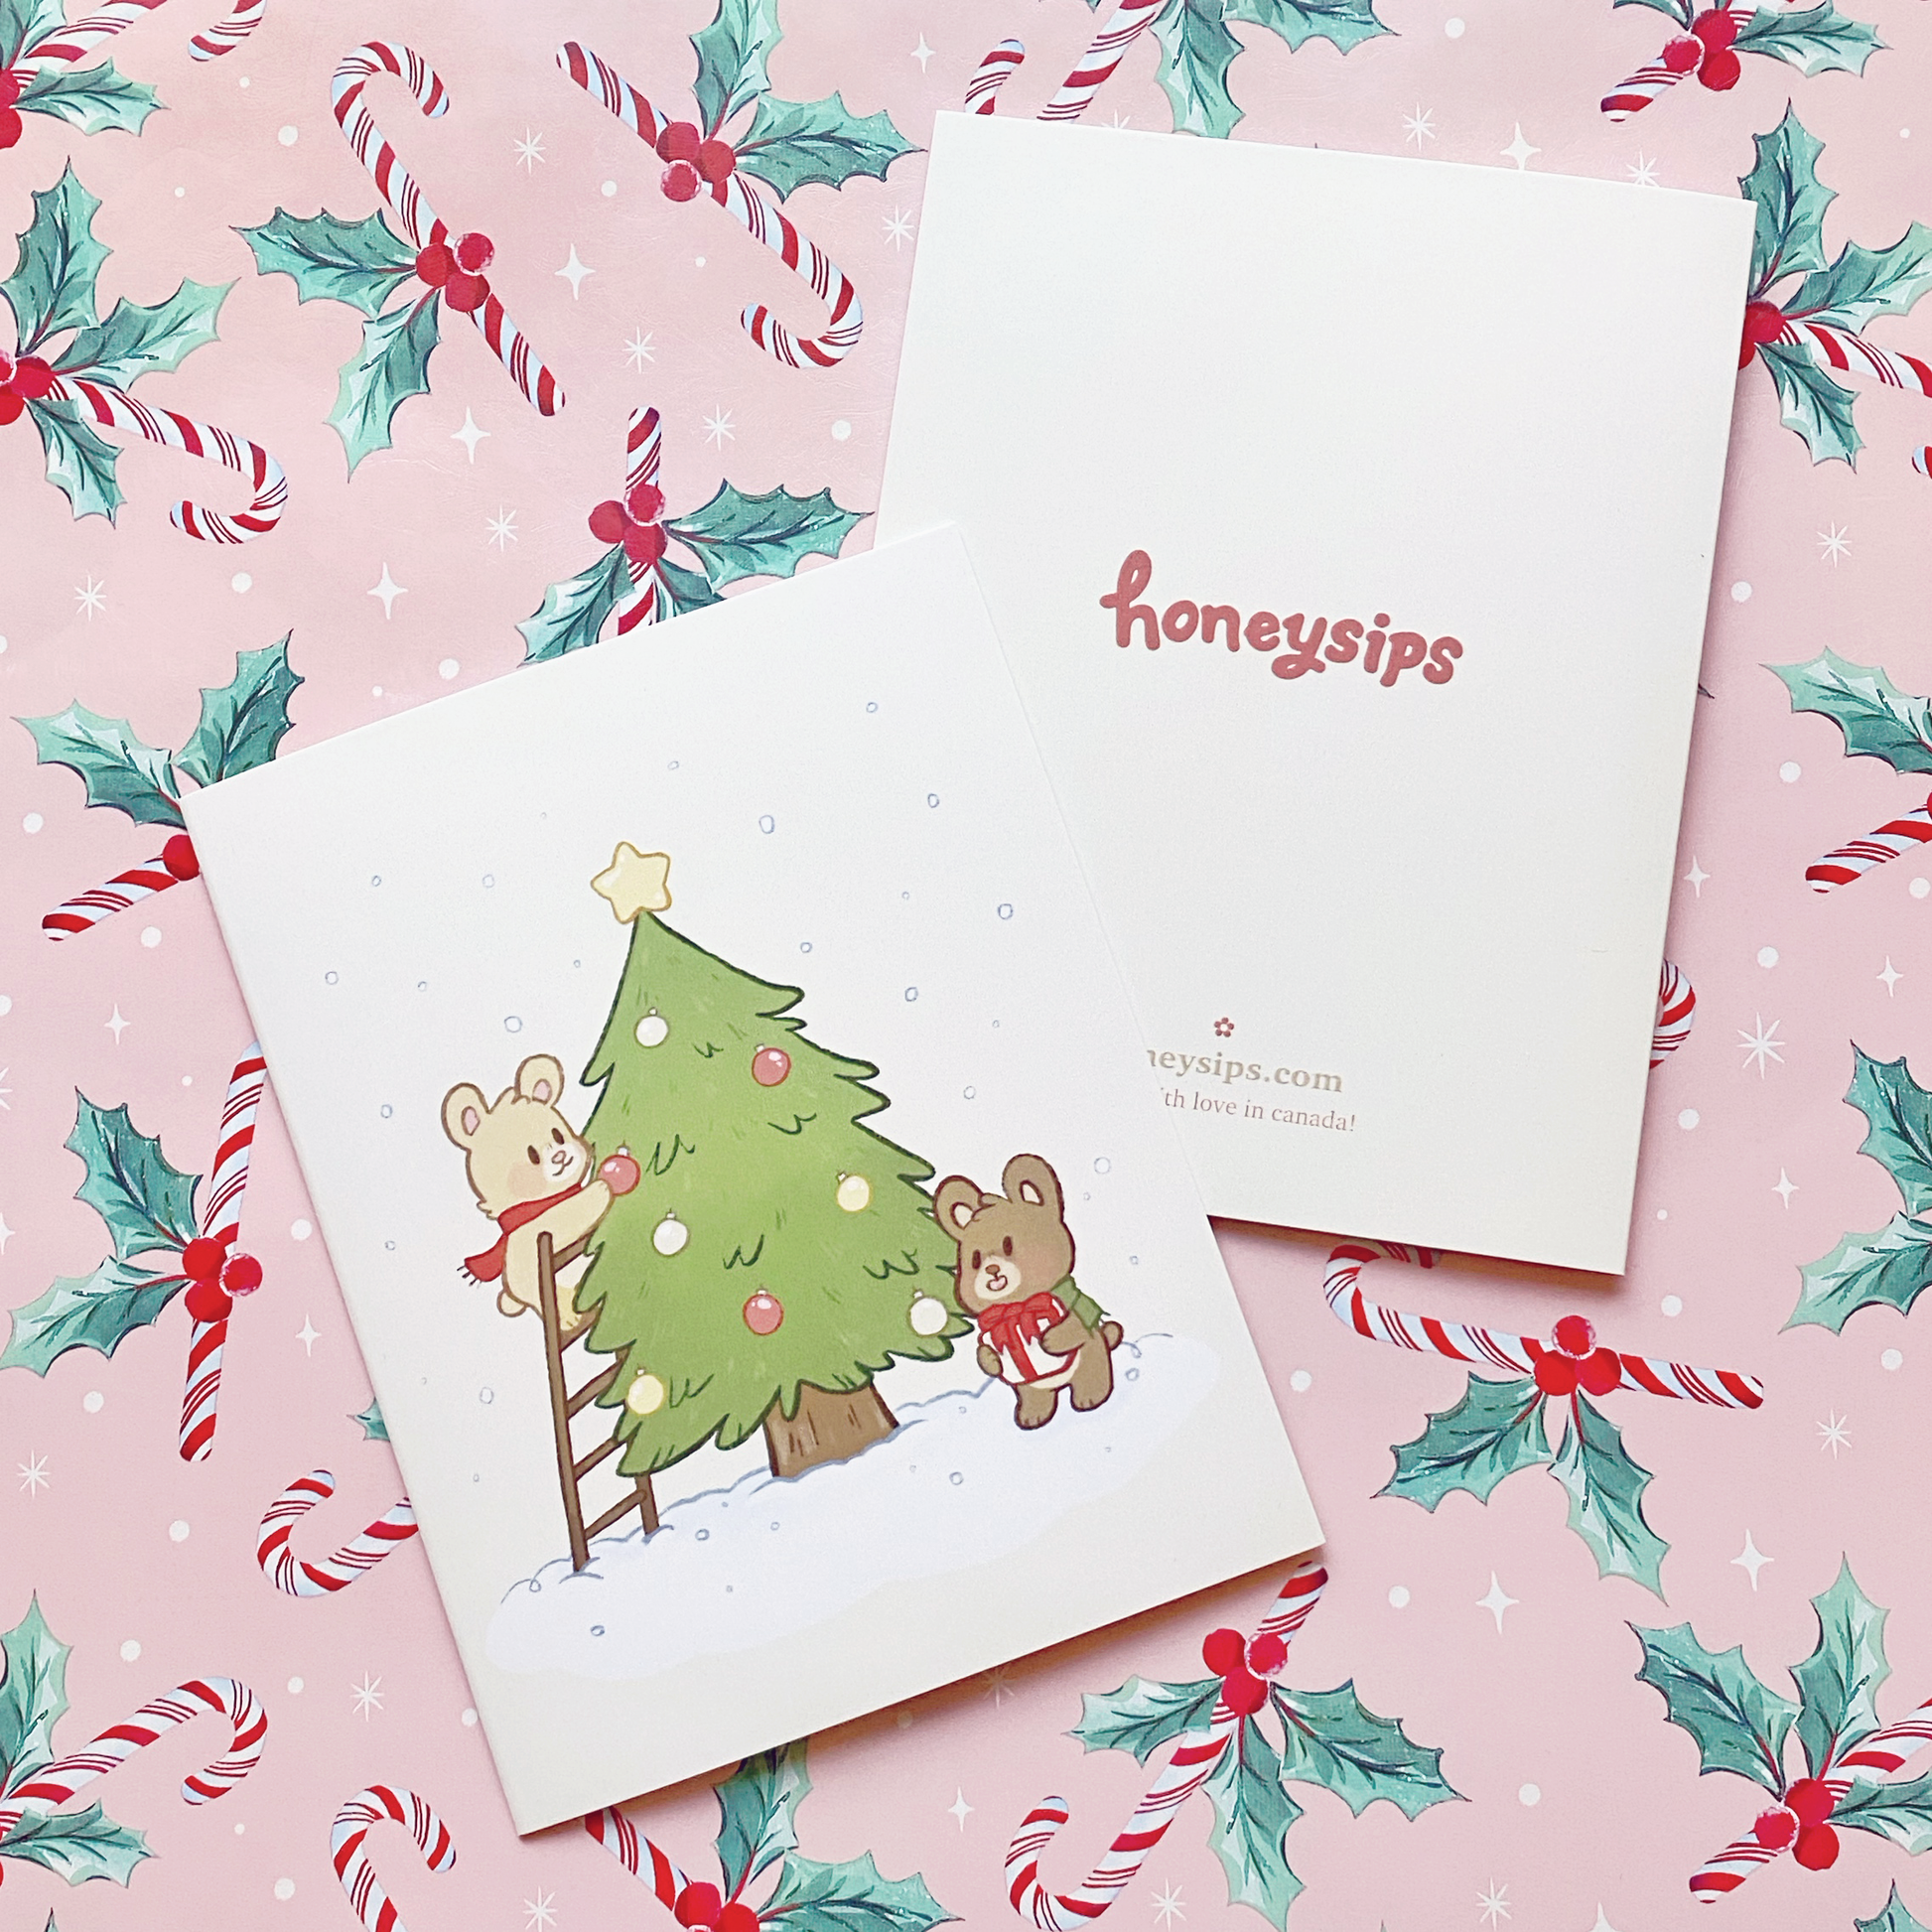 A2 Christmas card with two brown bears decorating a green Christmas tree in the snow on a cream card. Photographed on pastel pink wrapping paper with red and white candy canes on it with bunches of green and red holly.